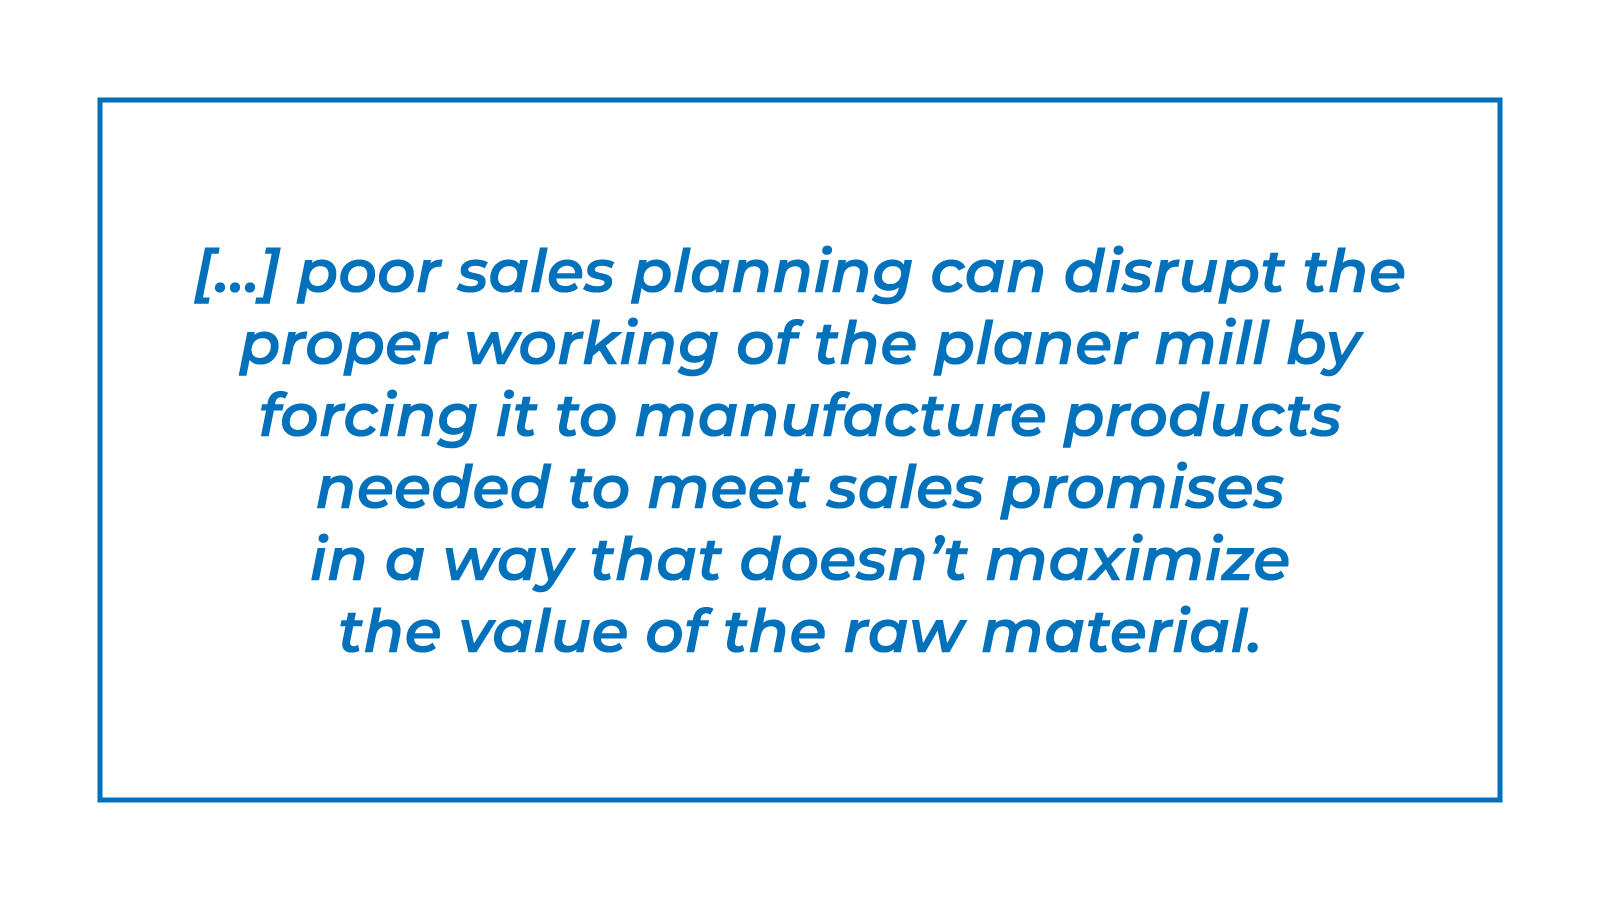 Poor sales planning can disrupt the proper working of the planer mill by forcing it to manufacture products needed to meet sales promises in a way that doesn’t maximize the value of the raw material.